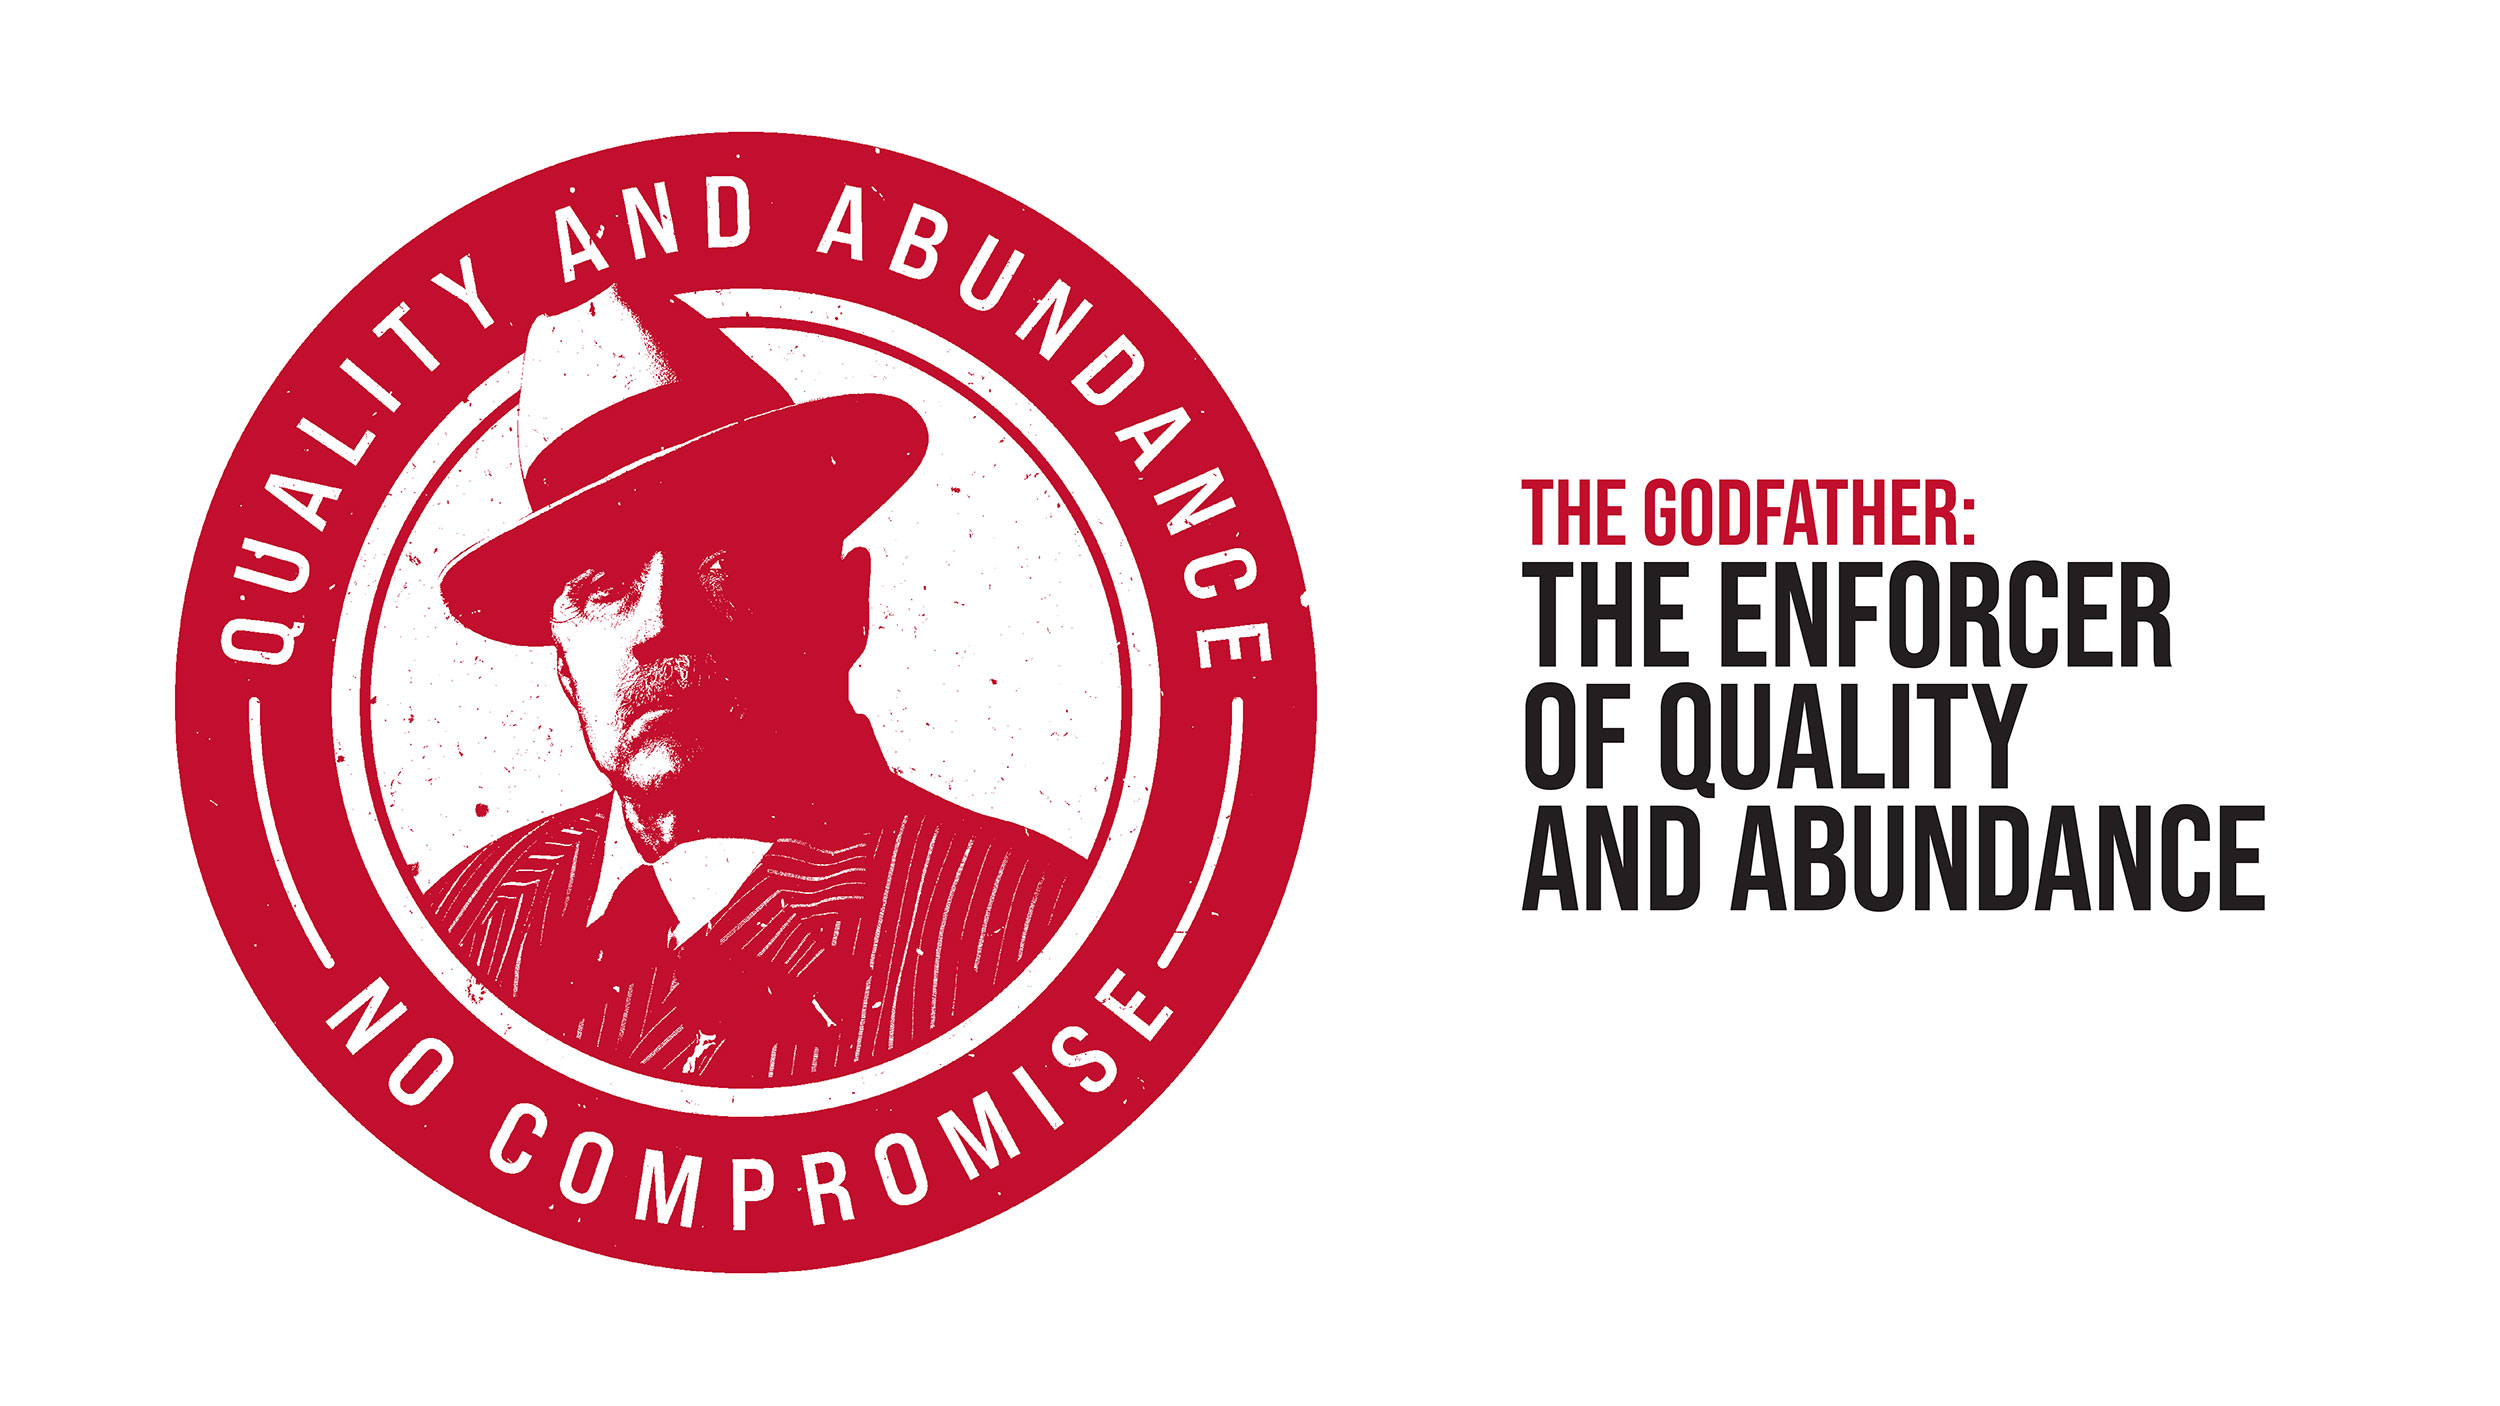 The Godfather: The Enforcer of Quality and Abundance